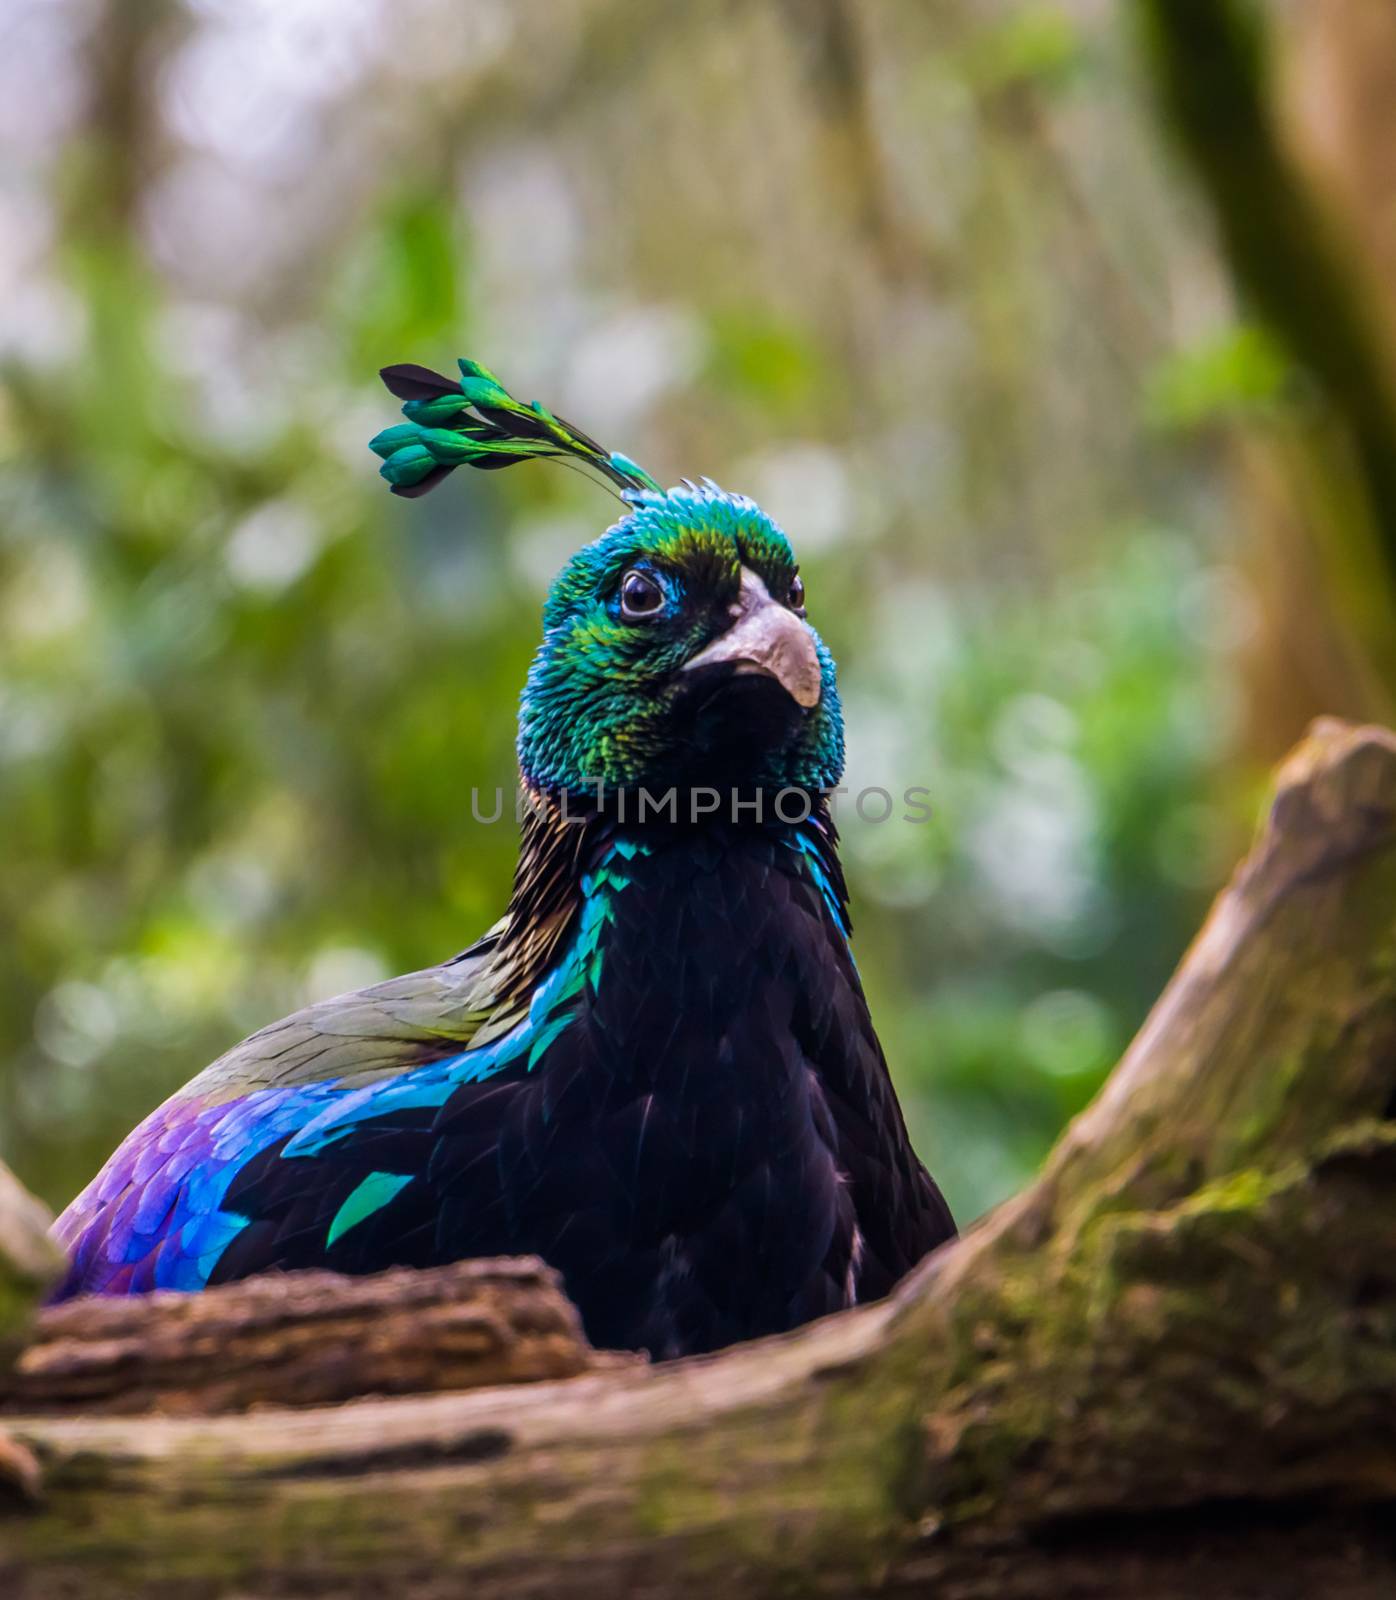 the face of a male himalayan monal in closeup, Colorful pheasant from the Himalaya mountains of India by charlottebleijenberg